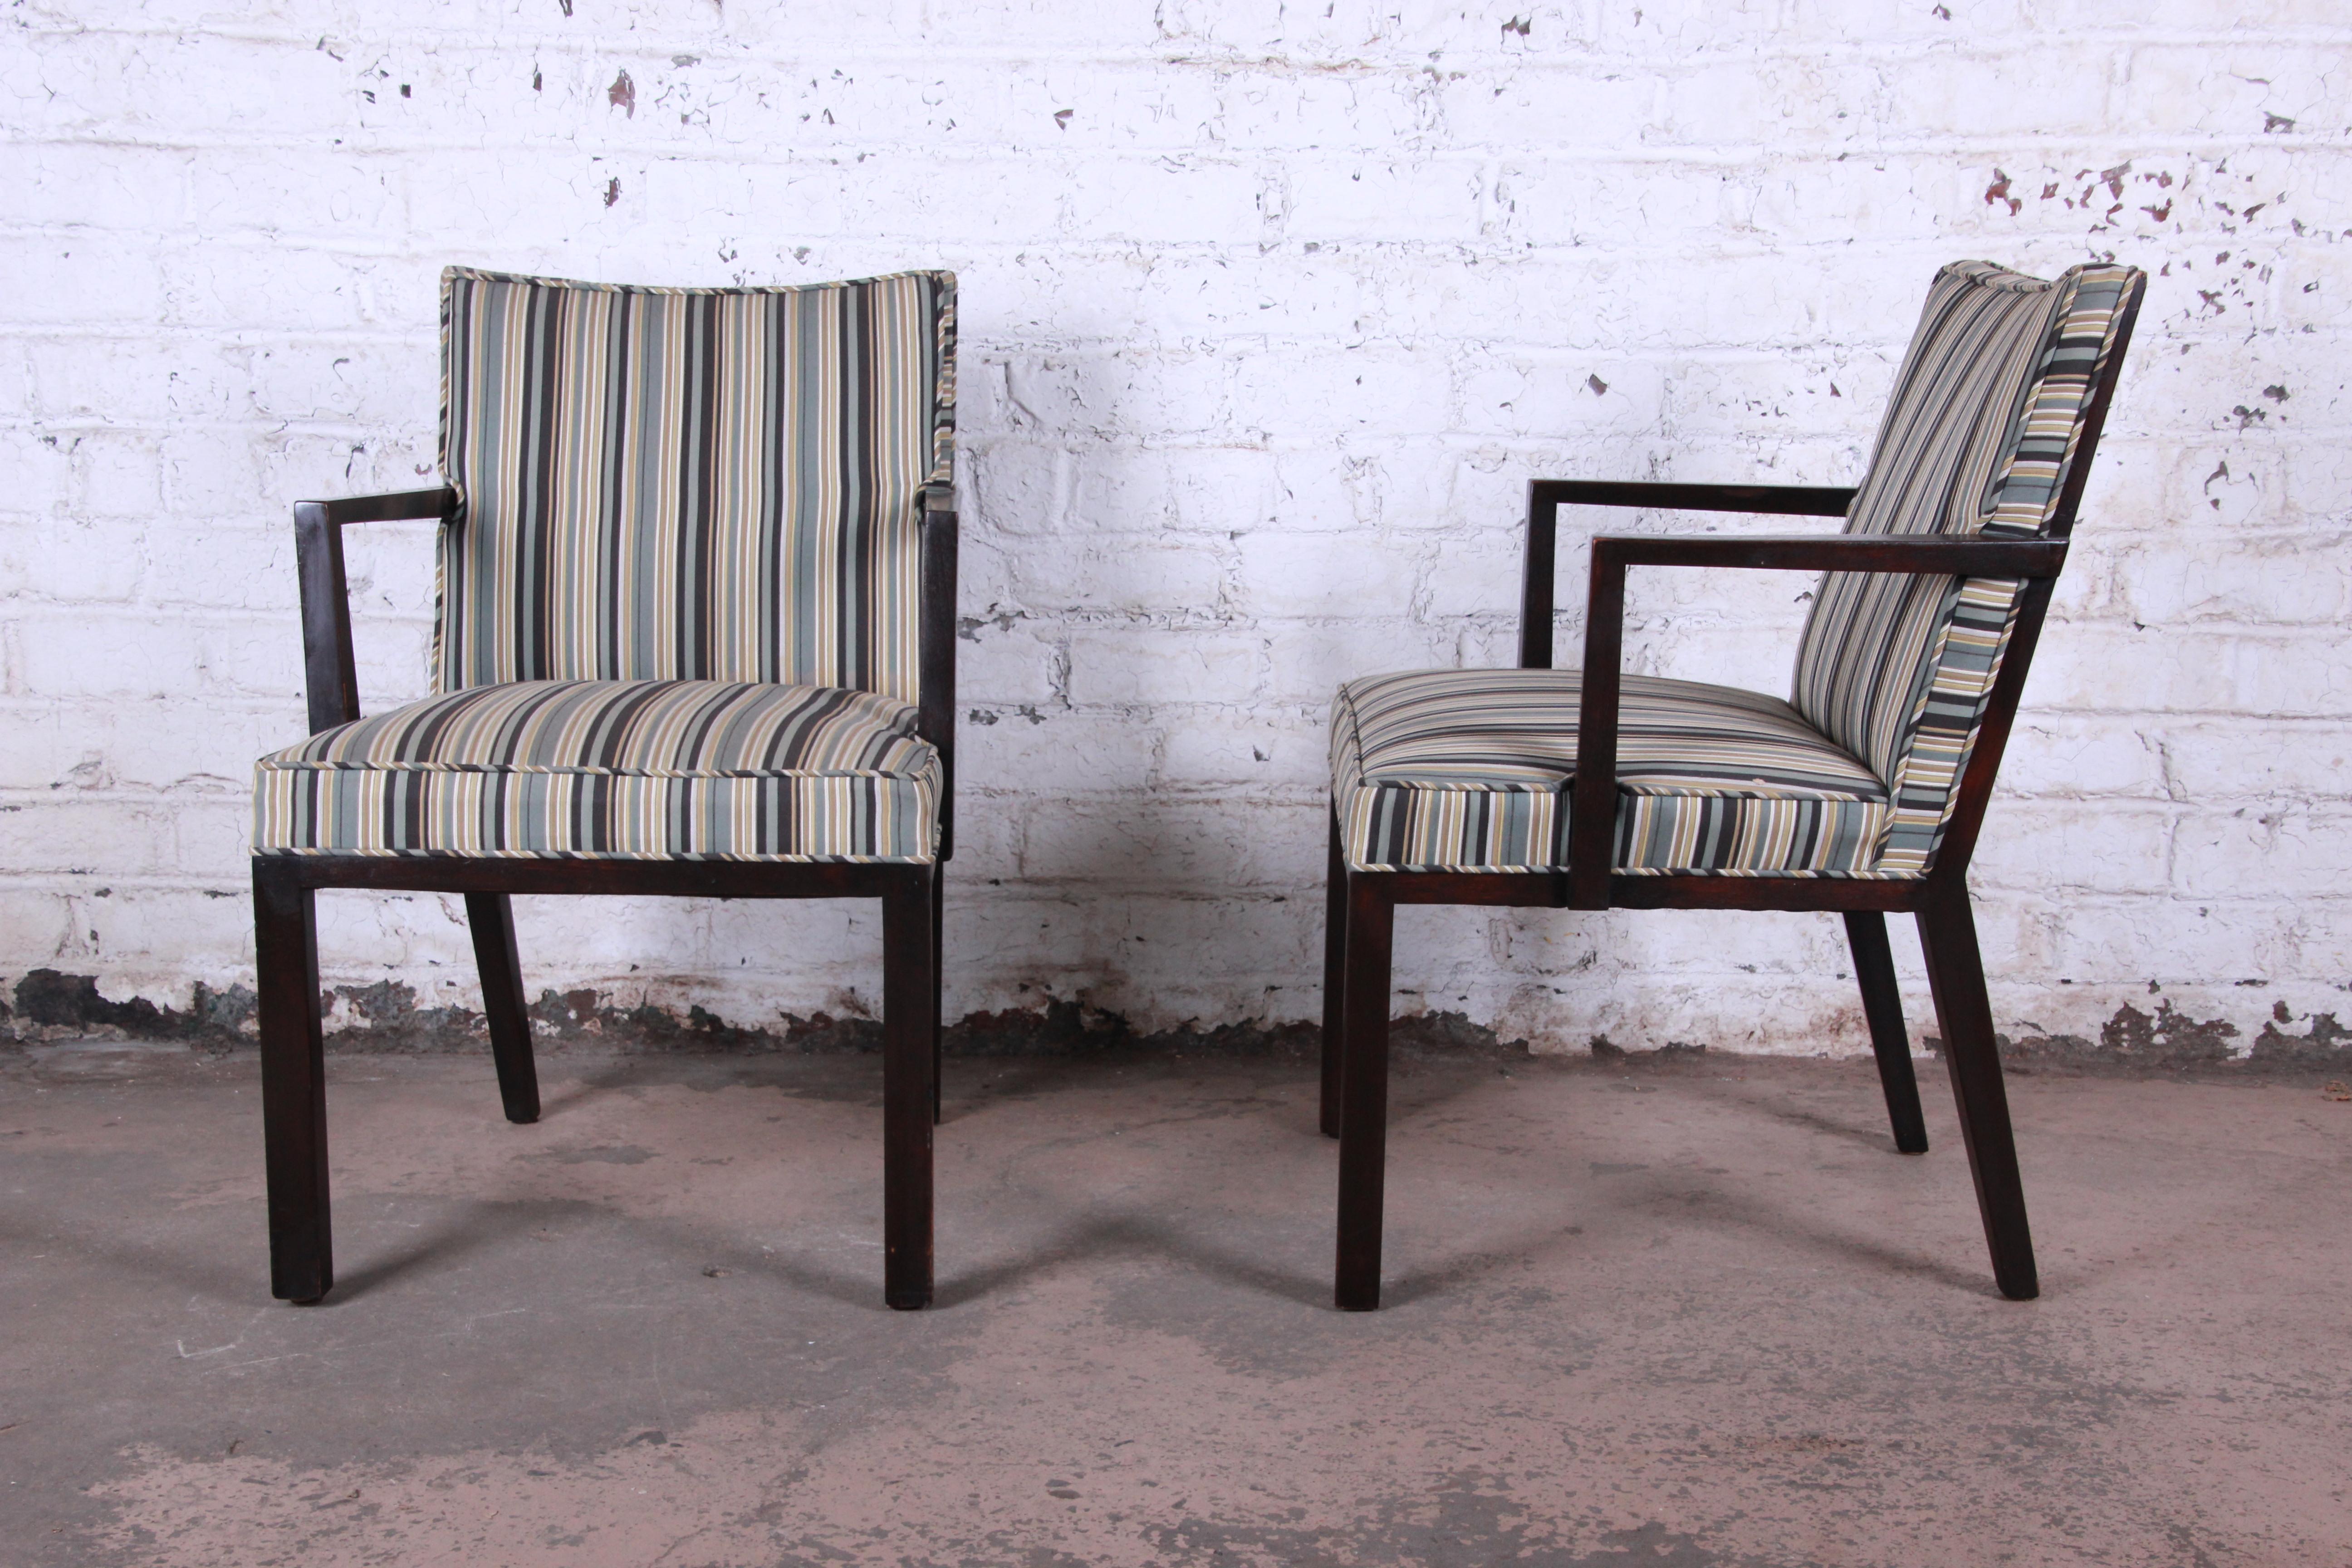 An exceptional pair of armchairs designed by Edward Wormley for Dunbar Furniture. The chairs feature sleek mid-century modern design and solid dark mahogany frames. The striped upholstery is in good condition and ready for use. The original Dunbar